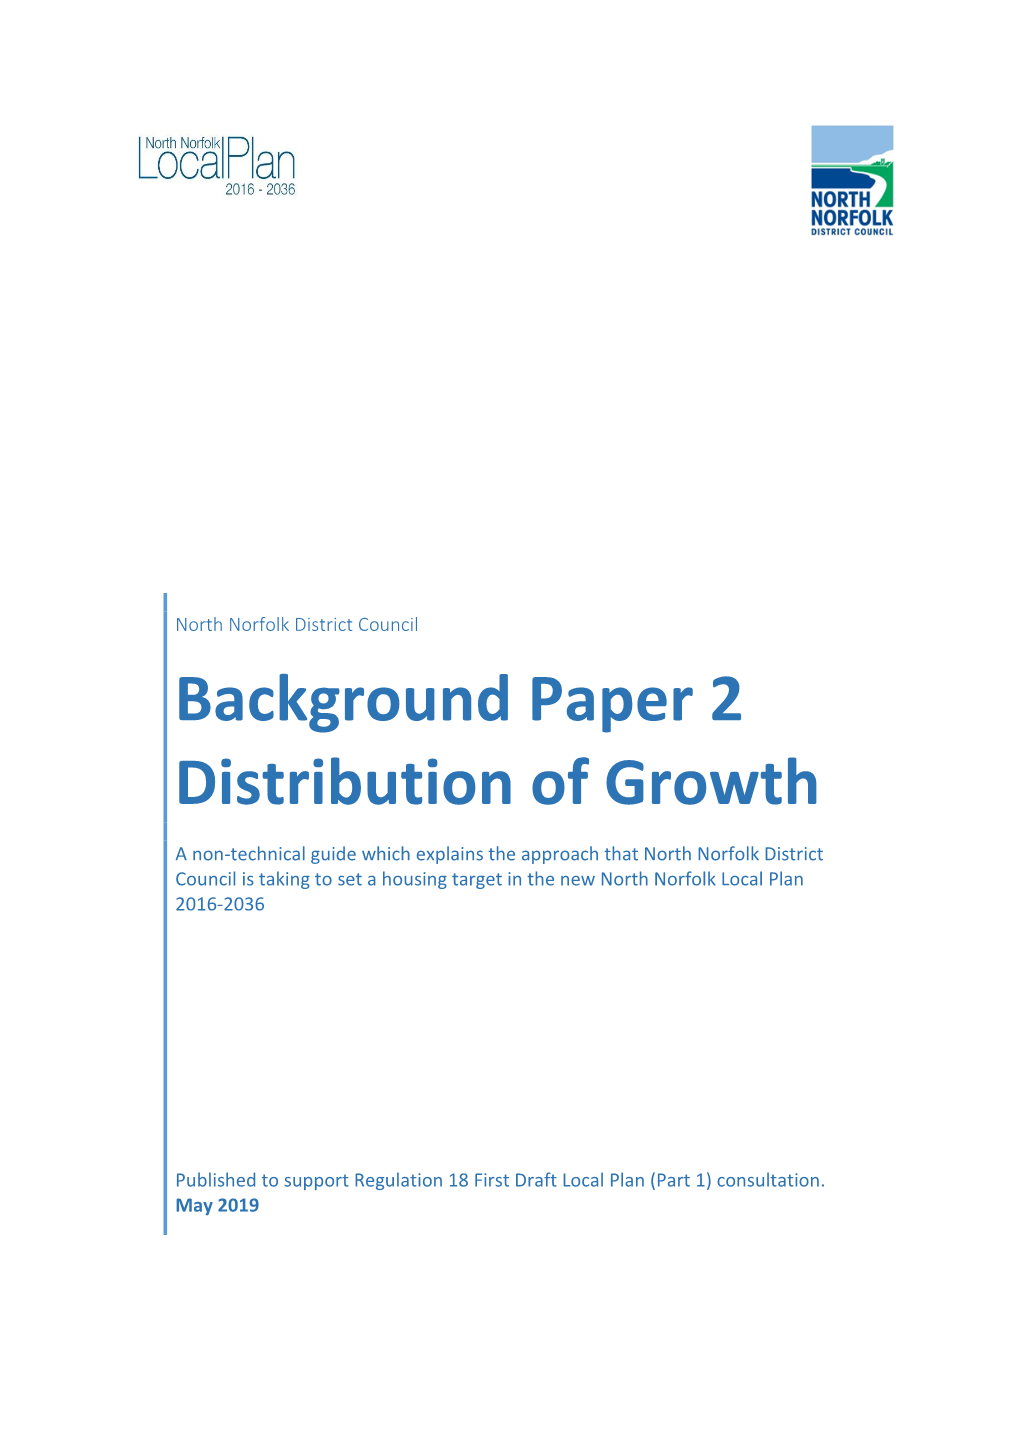 Background Paper 2 Distribution of Growth